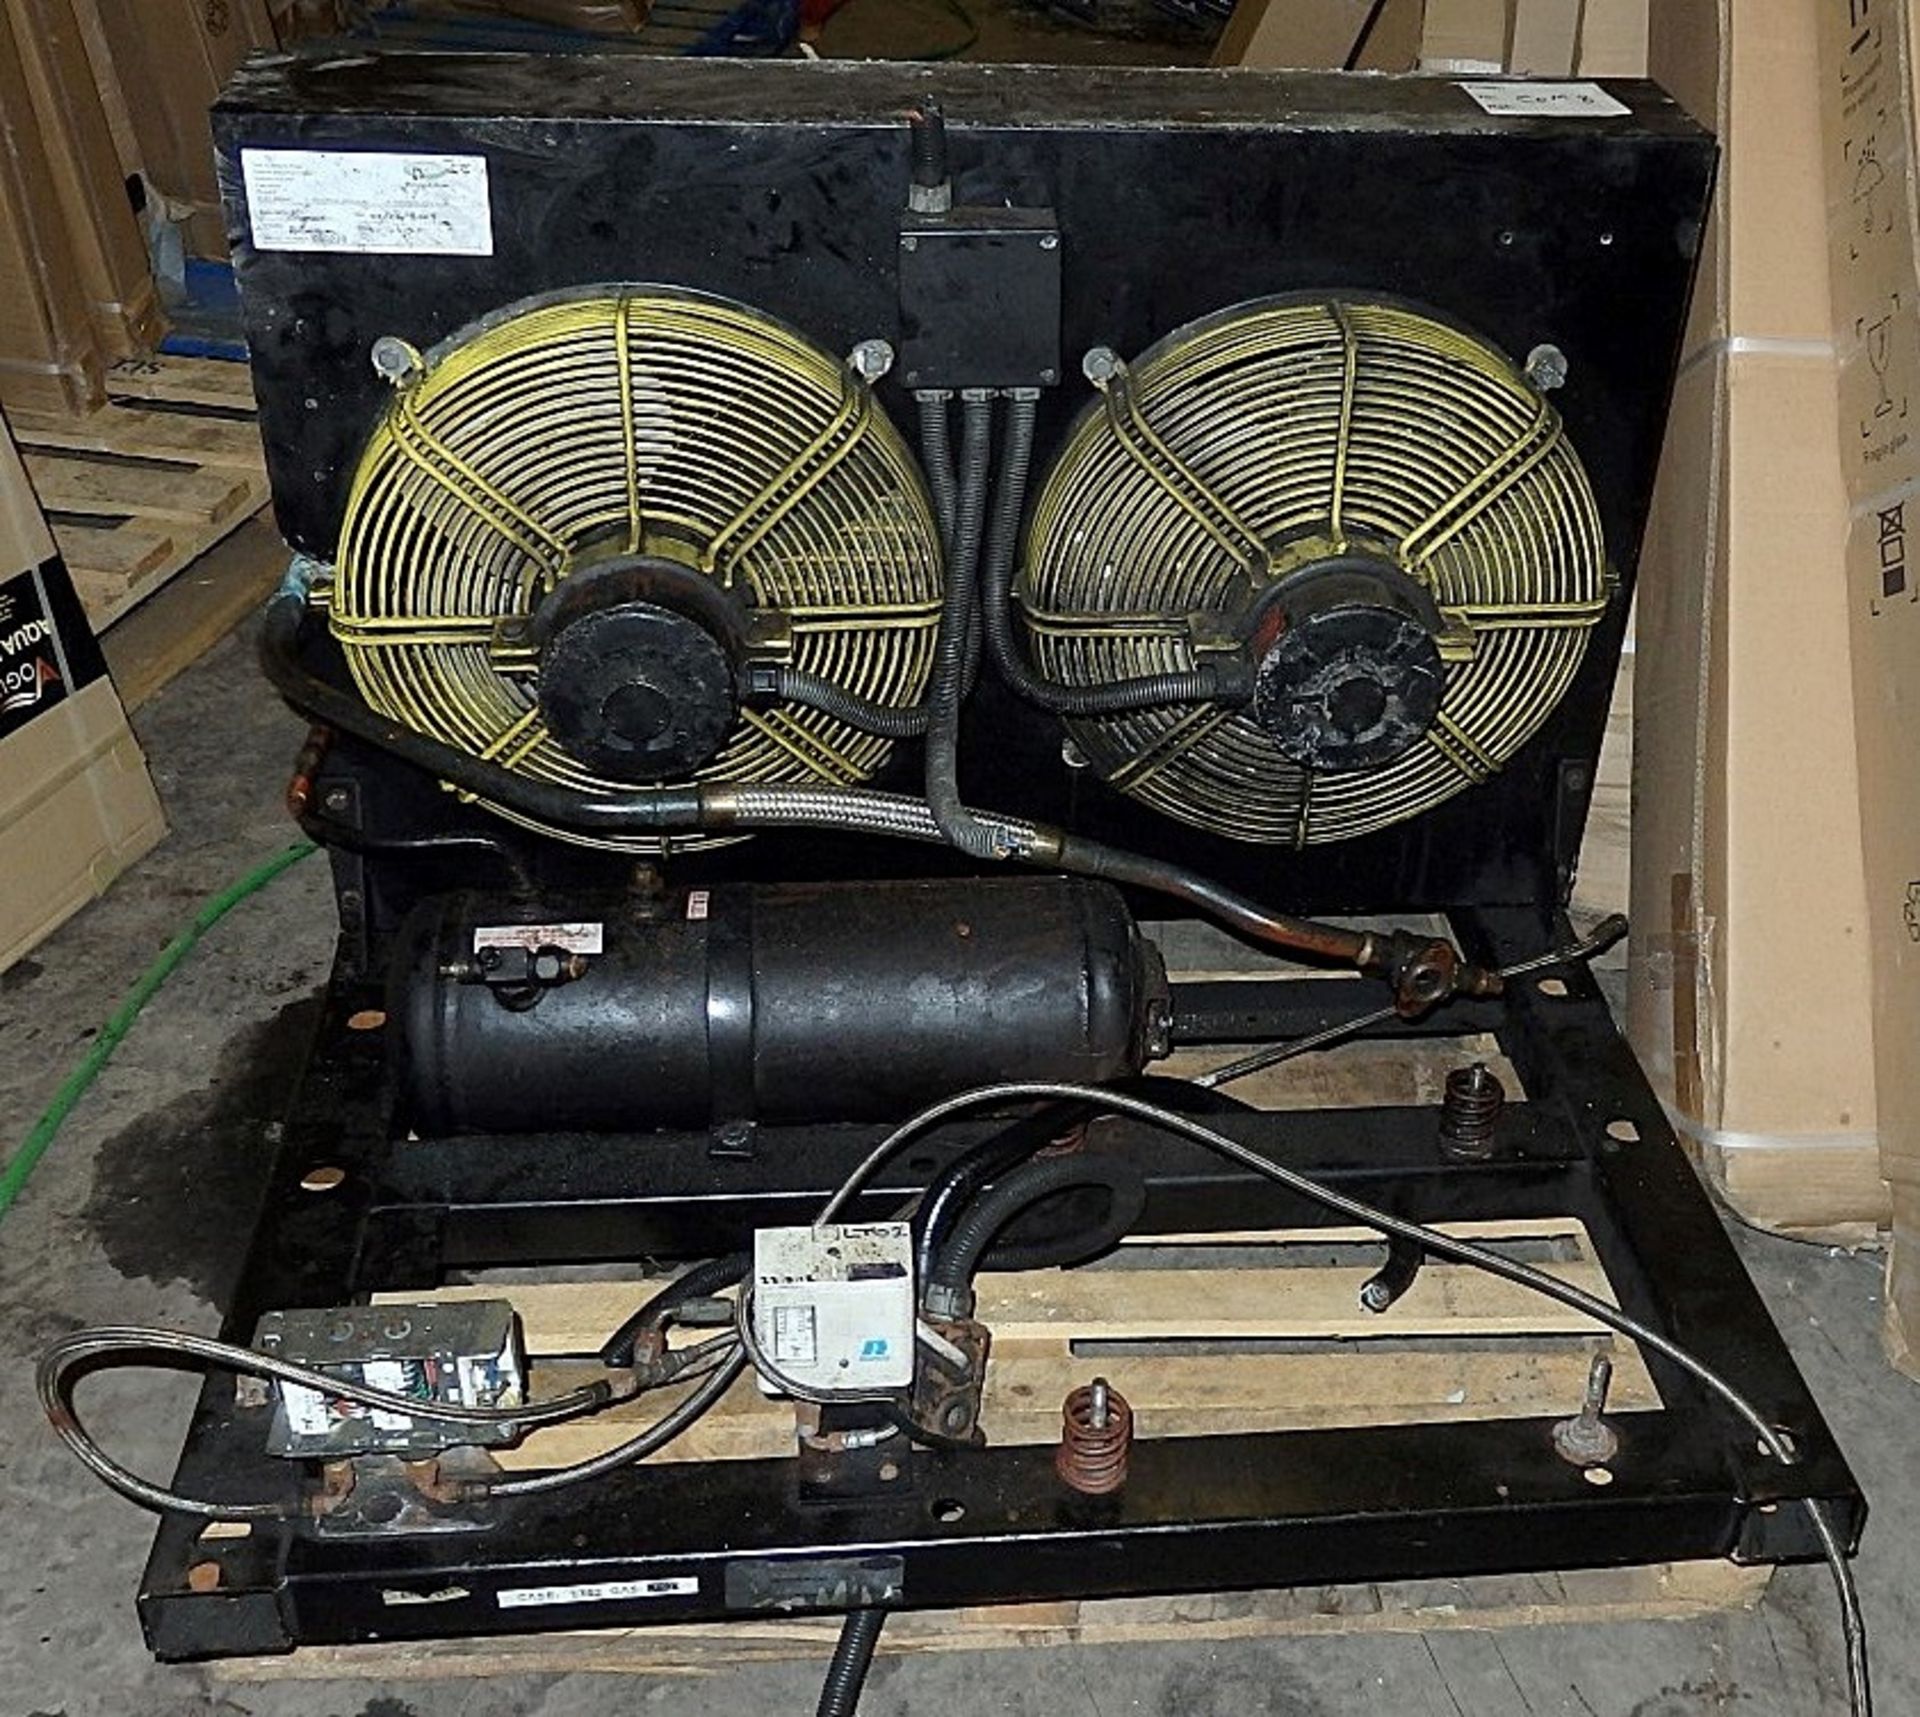 1 x Refrigeration Unit - Features A Ranco Pressure Controller & Fan Unit - Used, Sold As Seen -